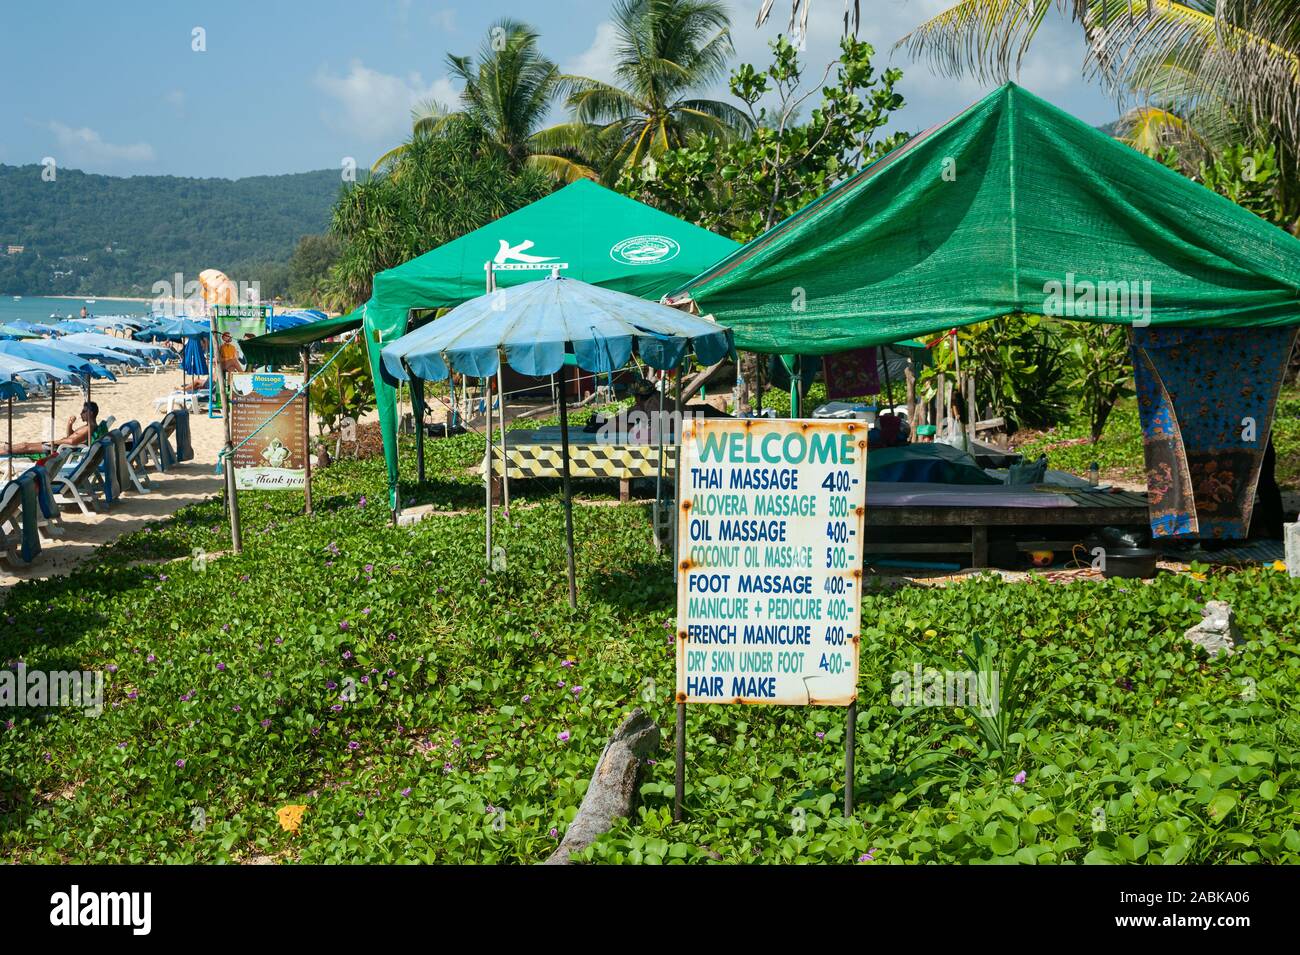 17.11.2019, Phuket, Thailand, Asia - A sign advertises for massages in tents on Karon Beach, a popular holiday destination with Russian tourists. Stock Photo